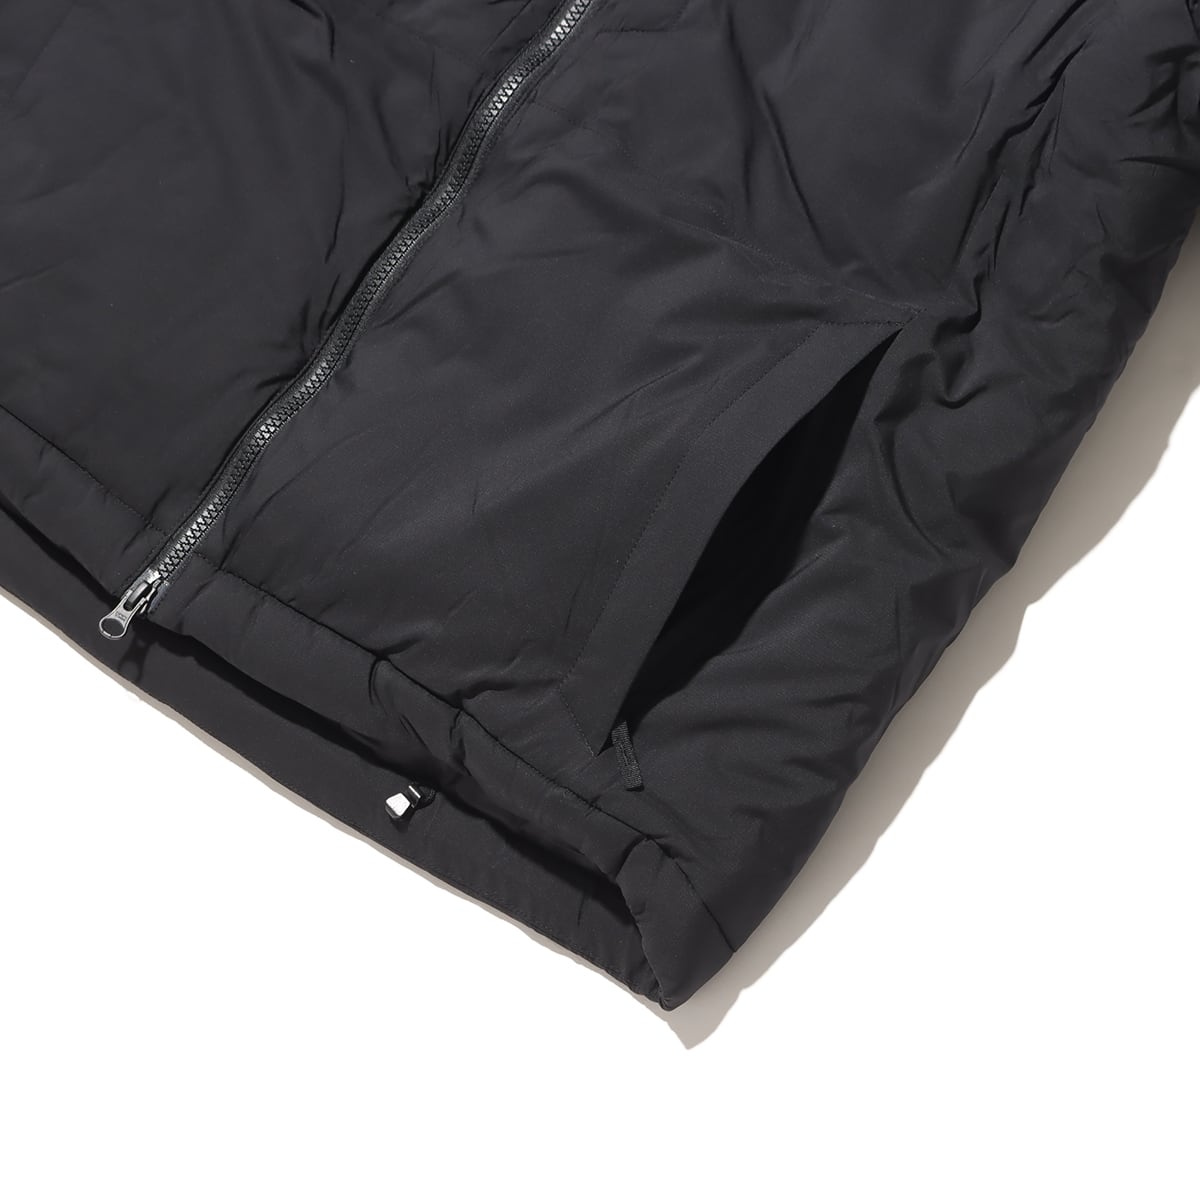 THE NORTH FACE PROJECT INSULATION JACKET BLACK 23FW-I